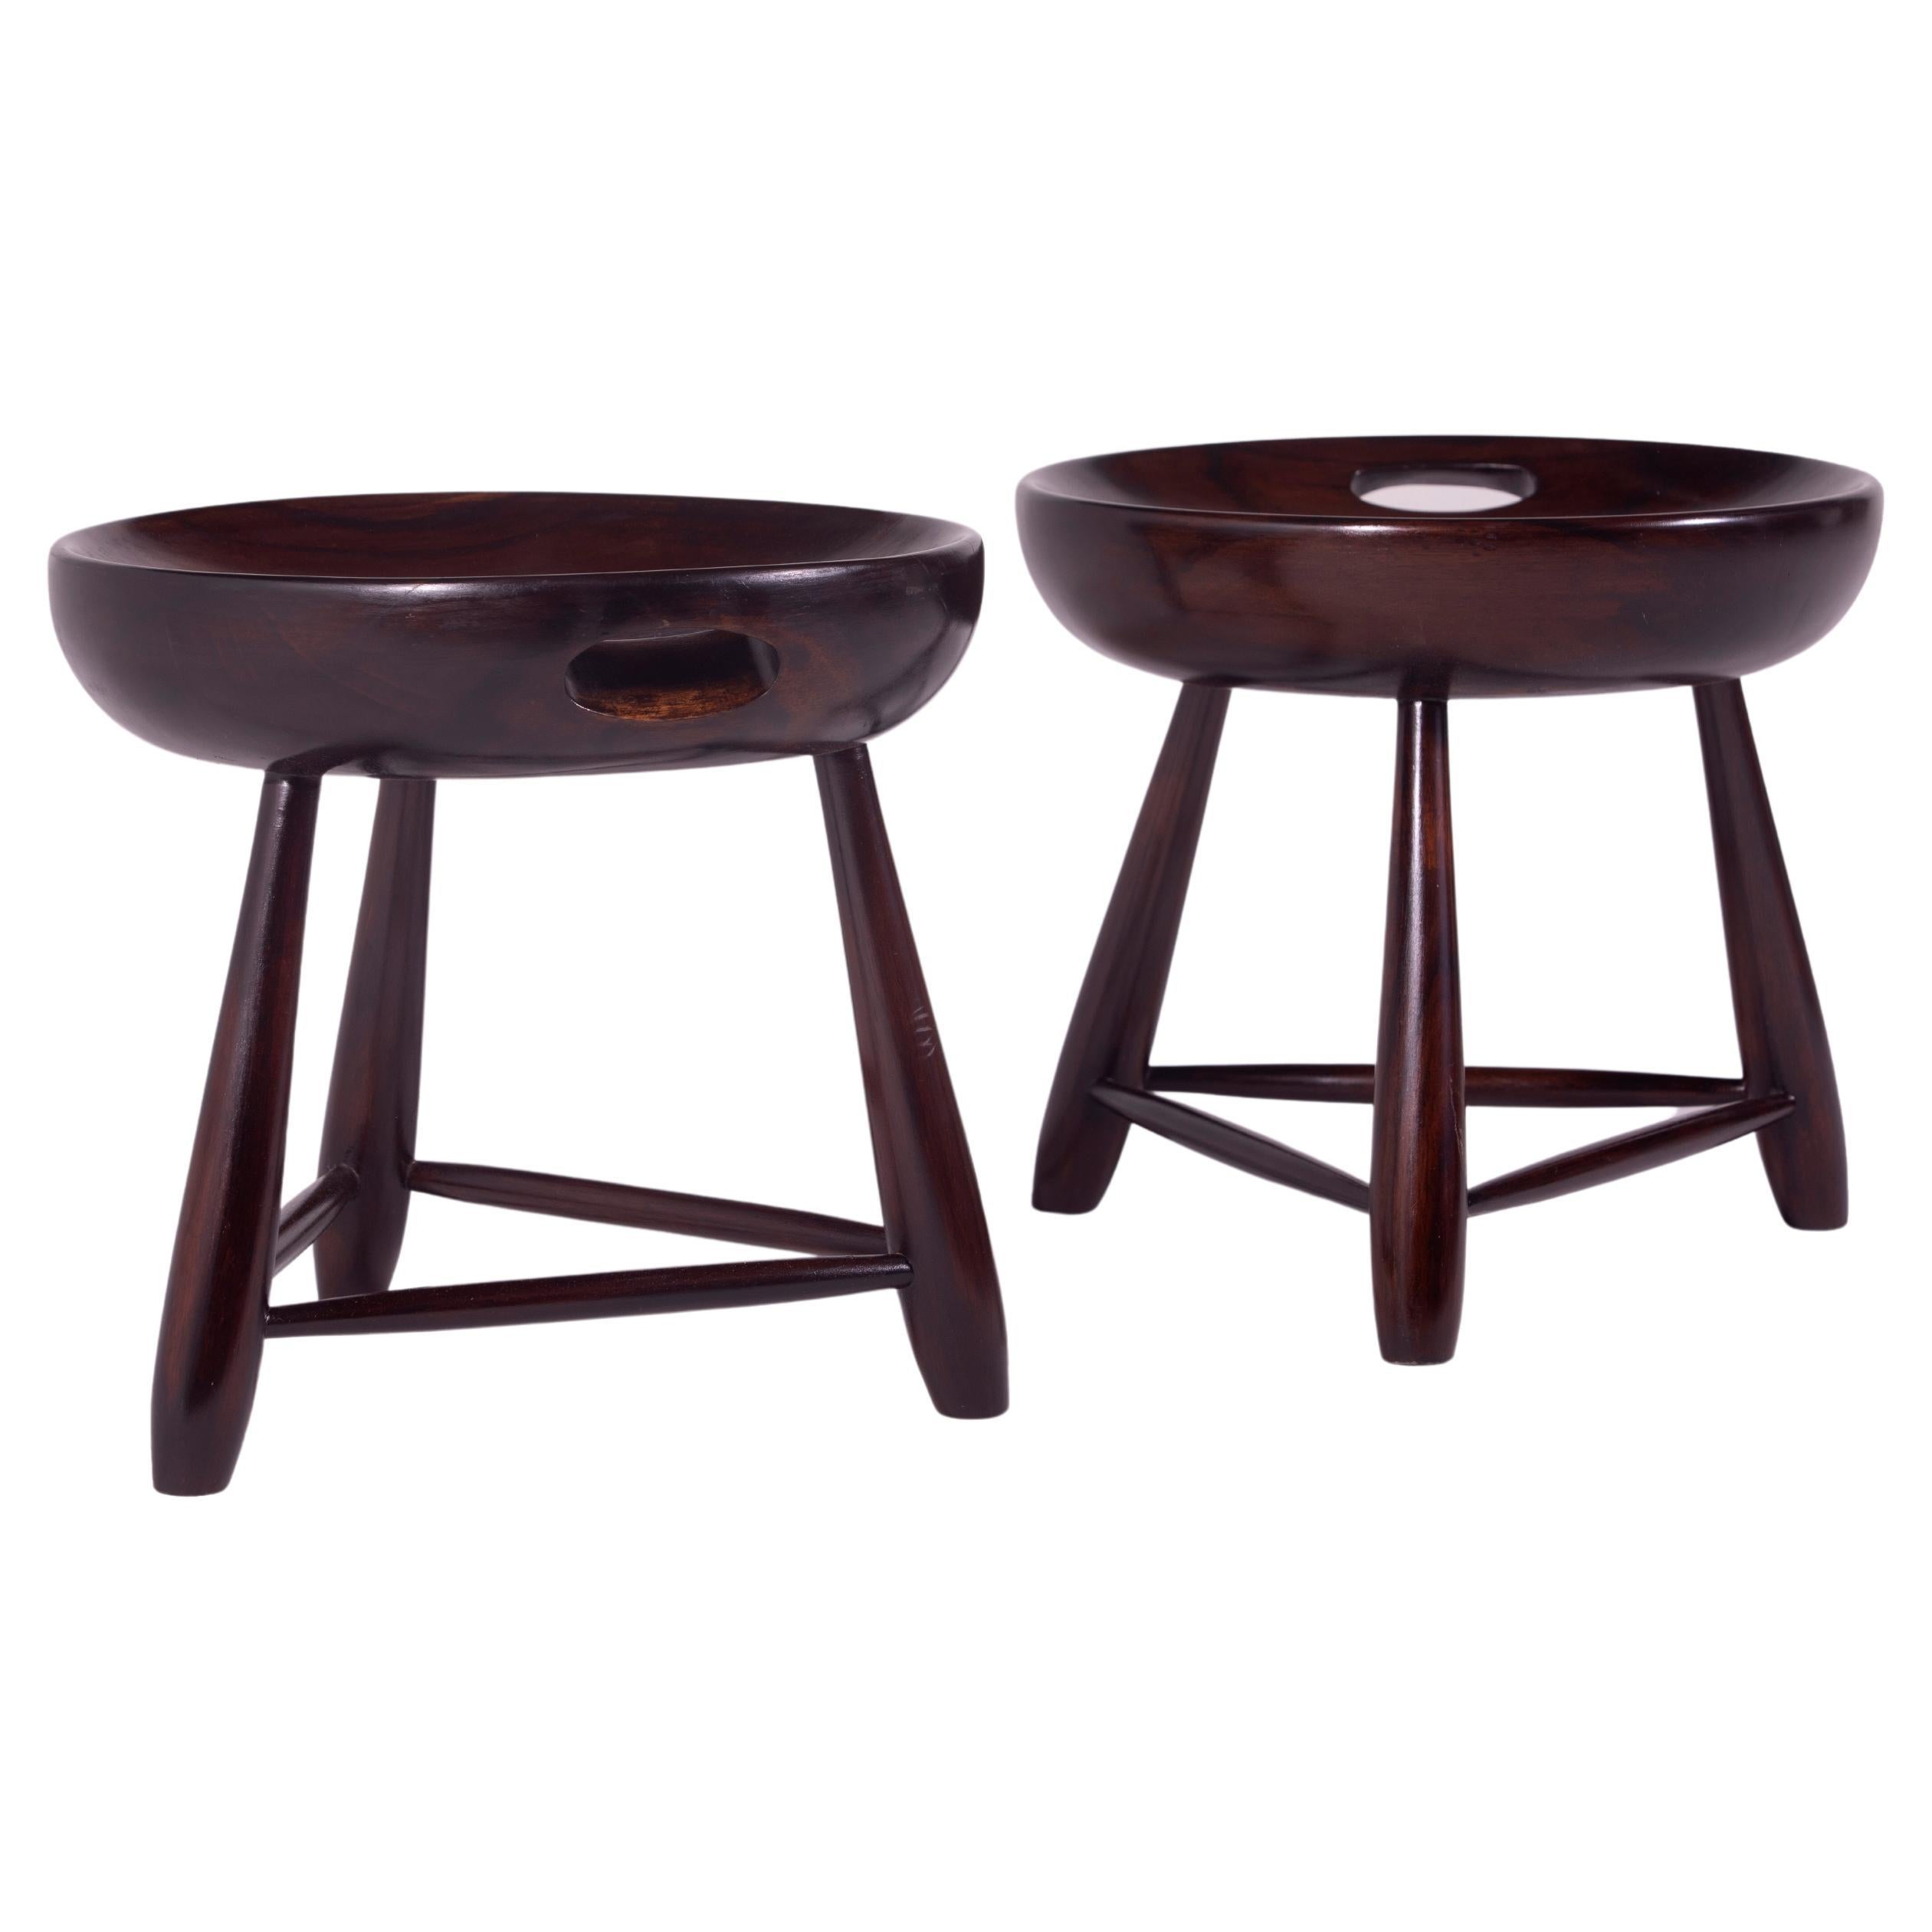 Mid-Century Modern Pair of "Mocho" Stools by Sergio Rodrigues, Brazil, 1960s